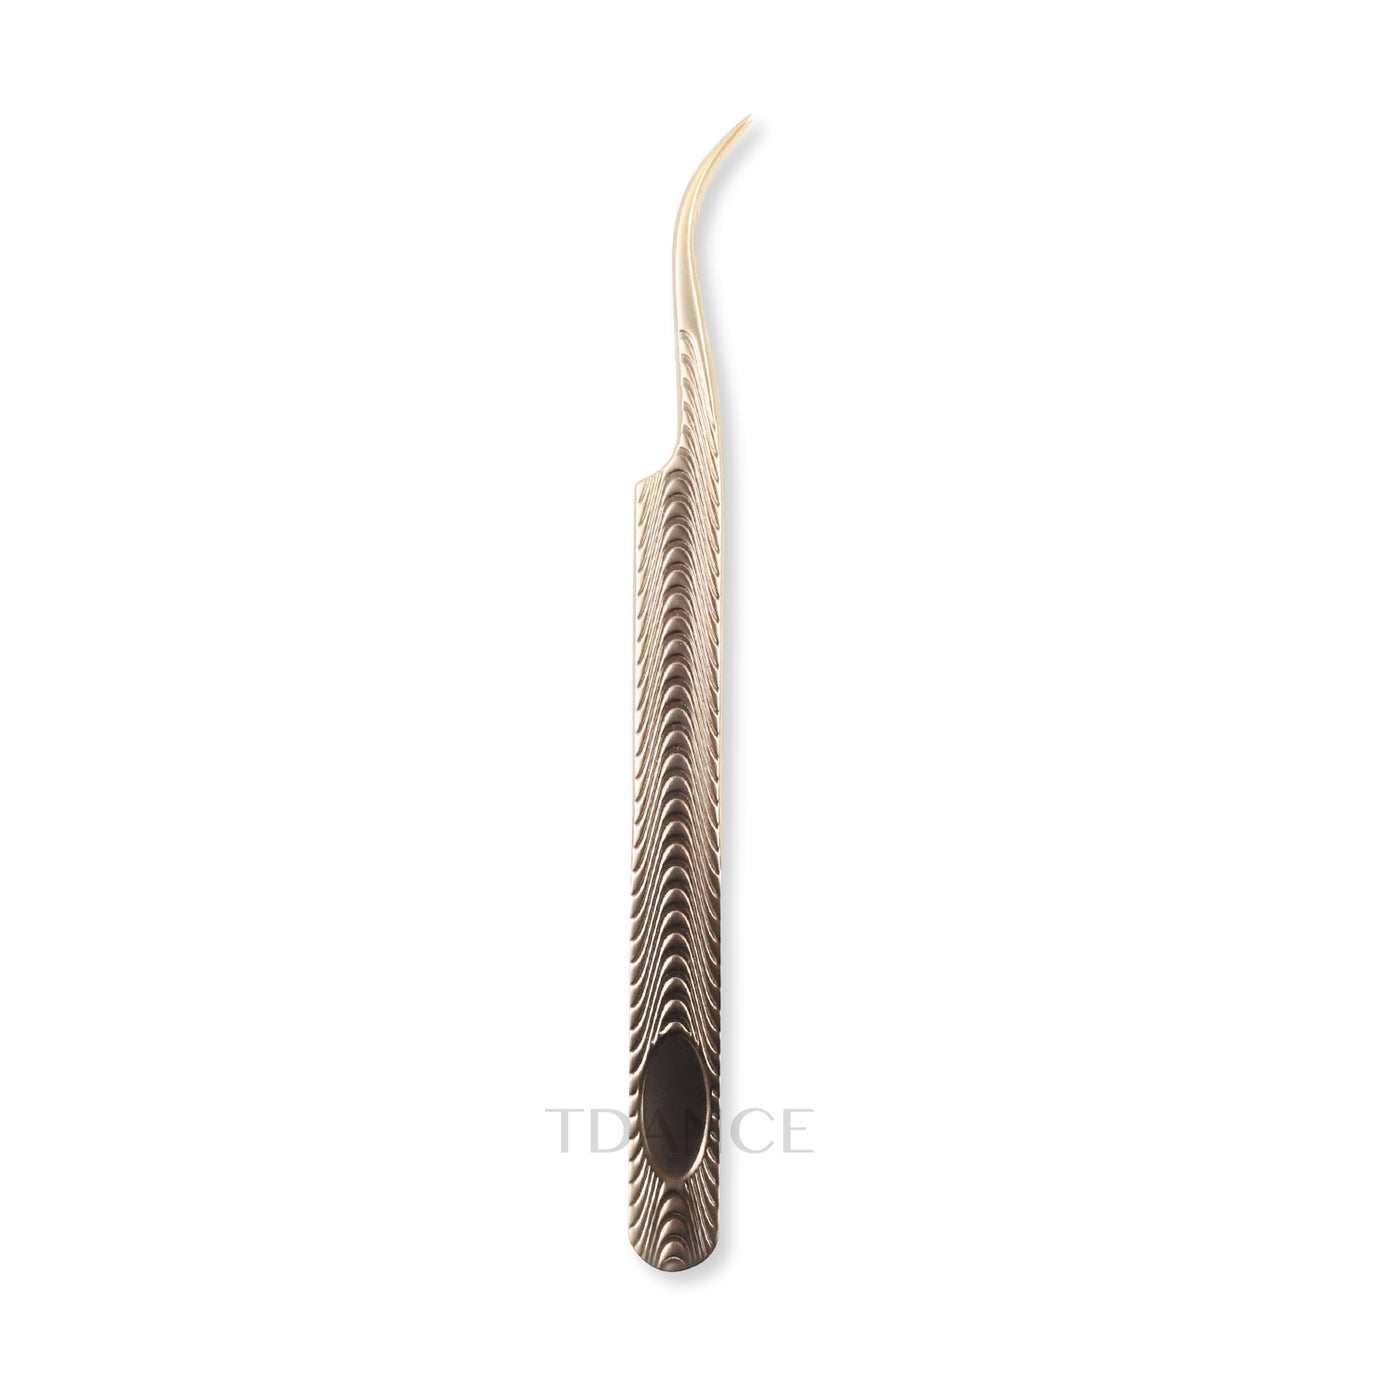 TF-06 Fish Scale Gold Tweezers For Eyelash Extension